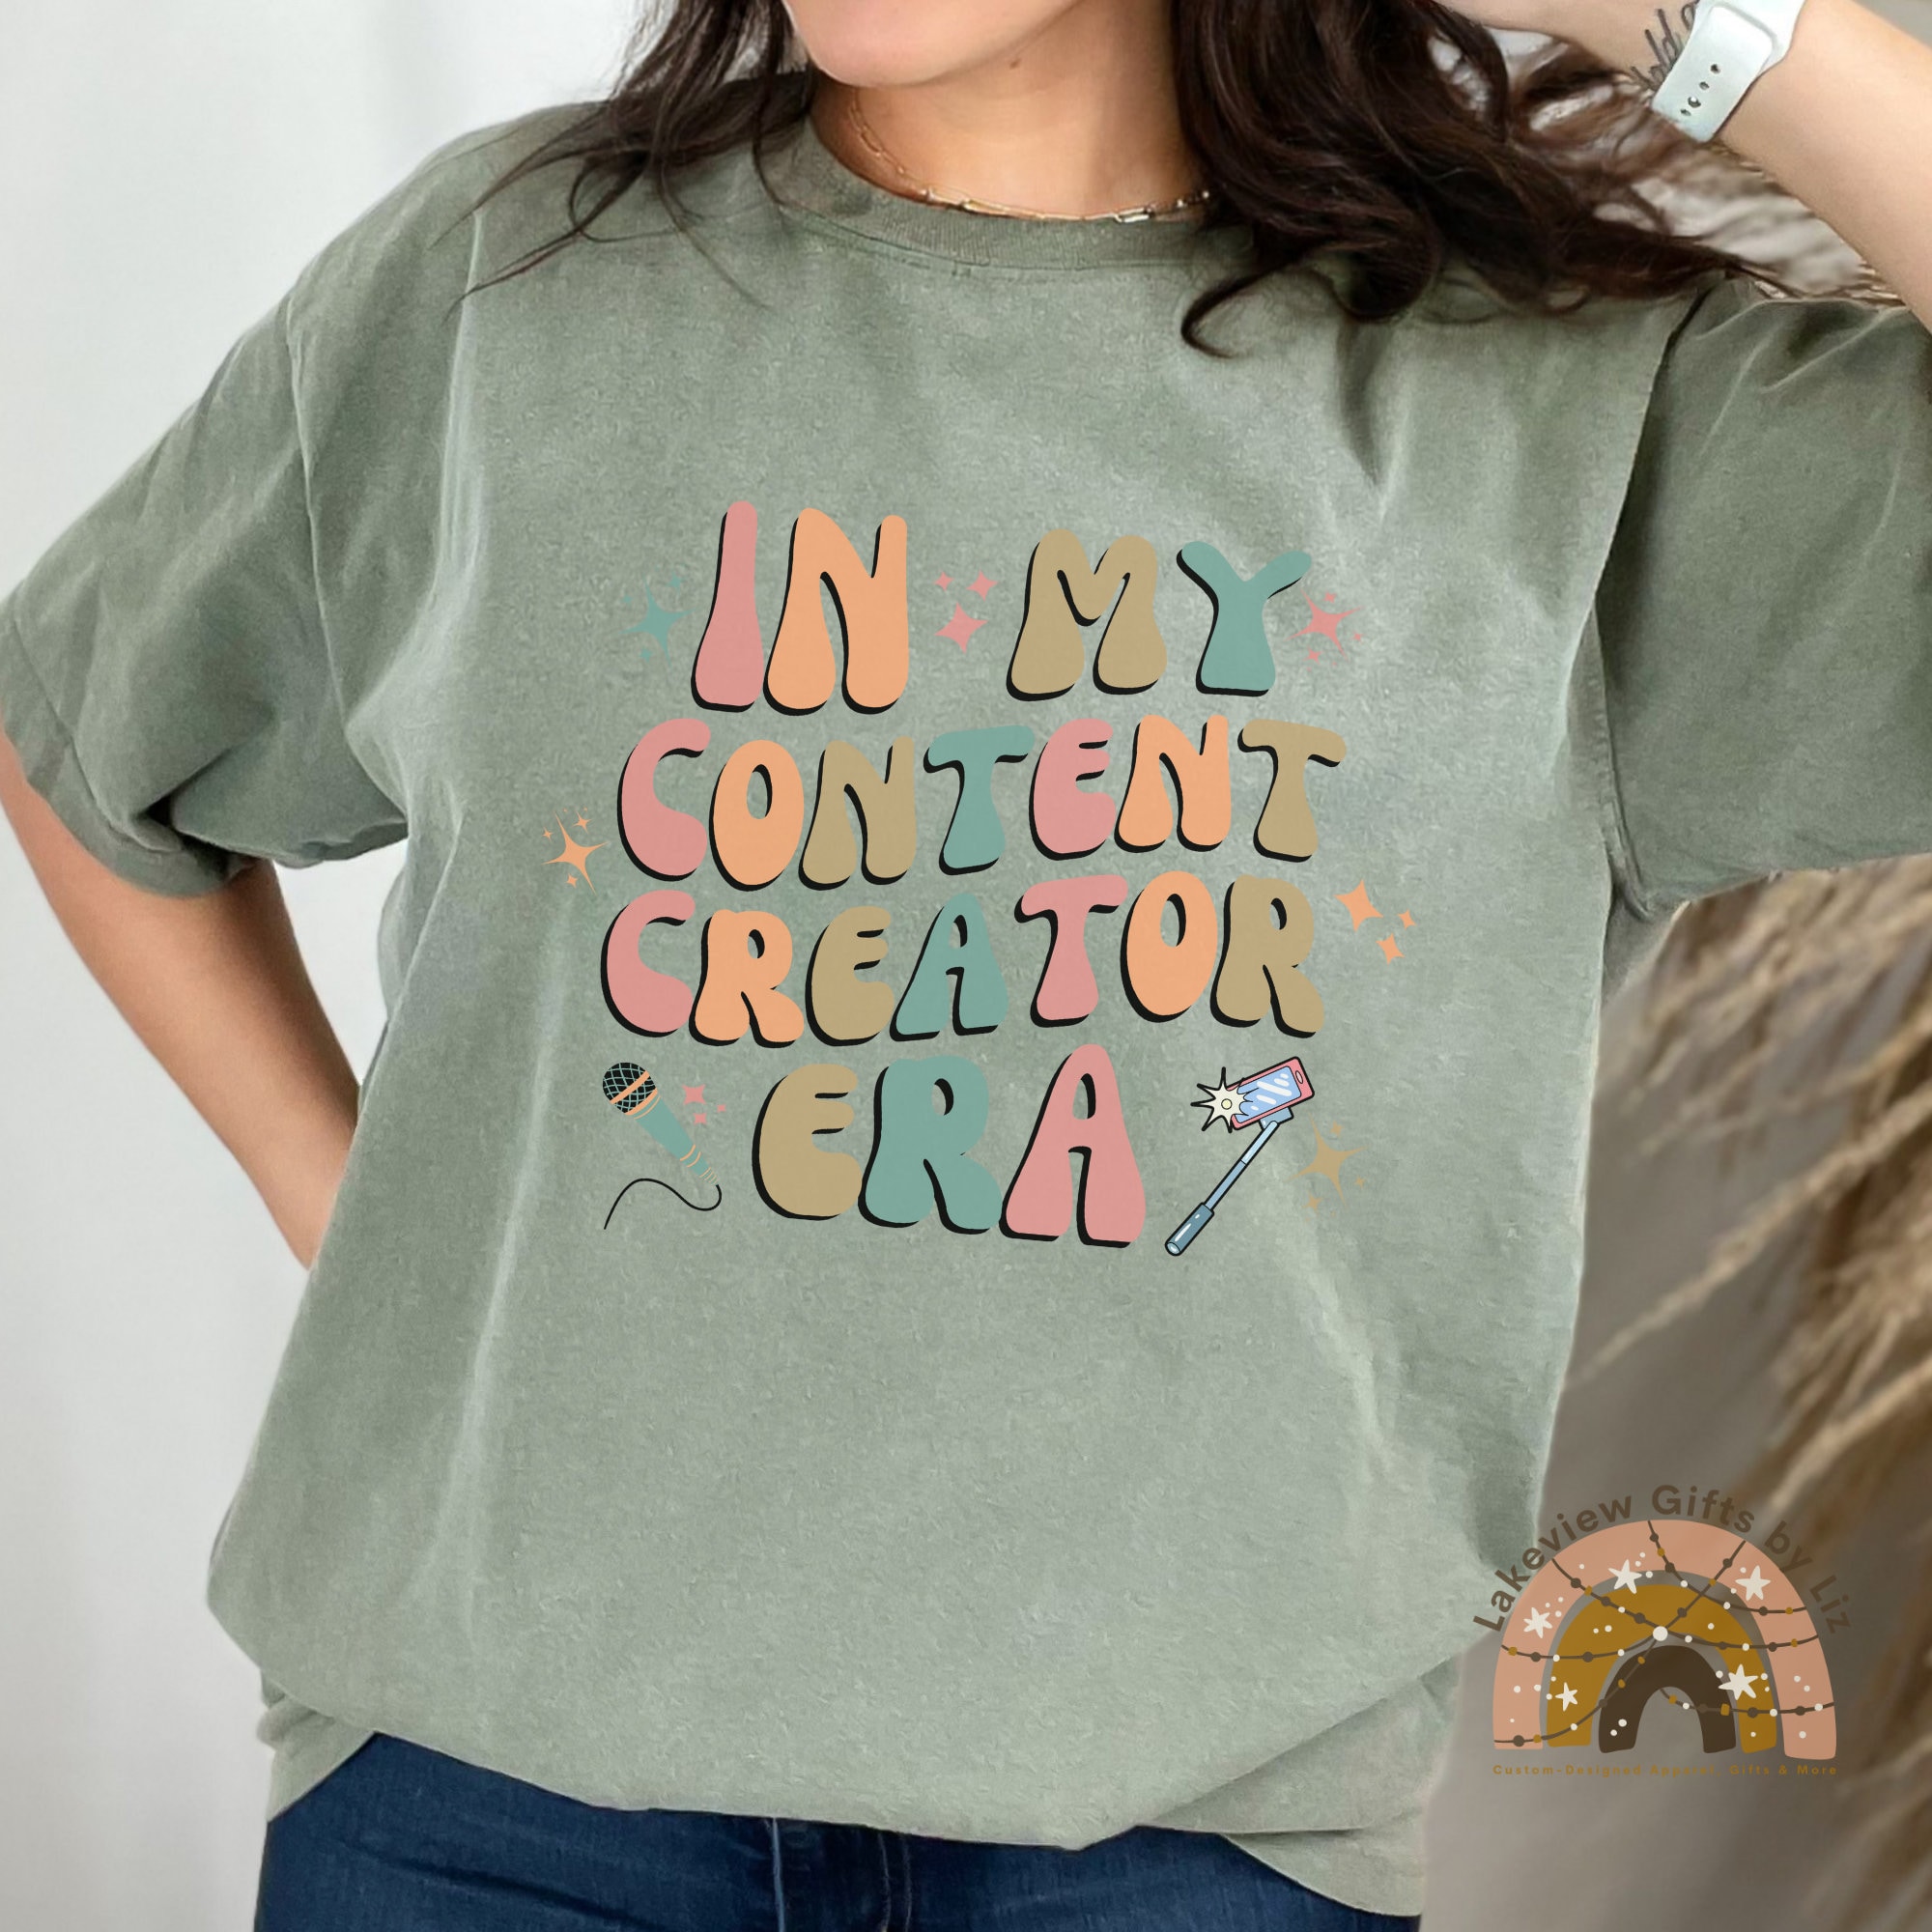 Content Creator with Icons' Men's T-Shirt